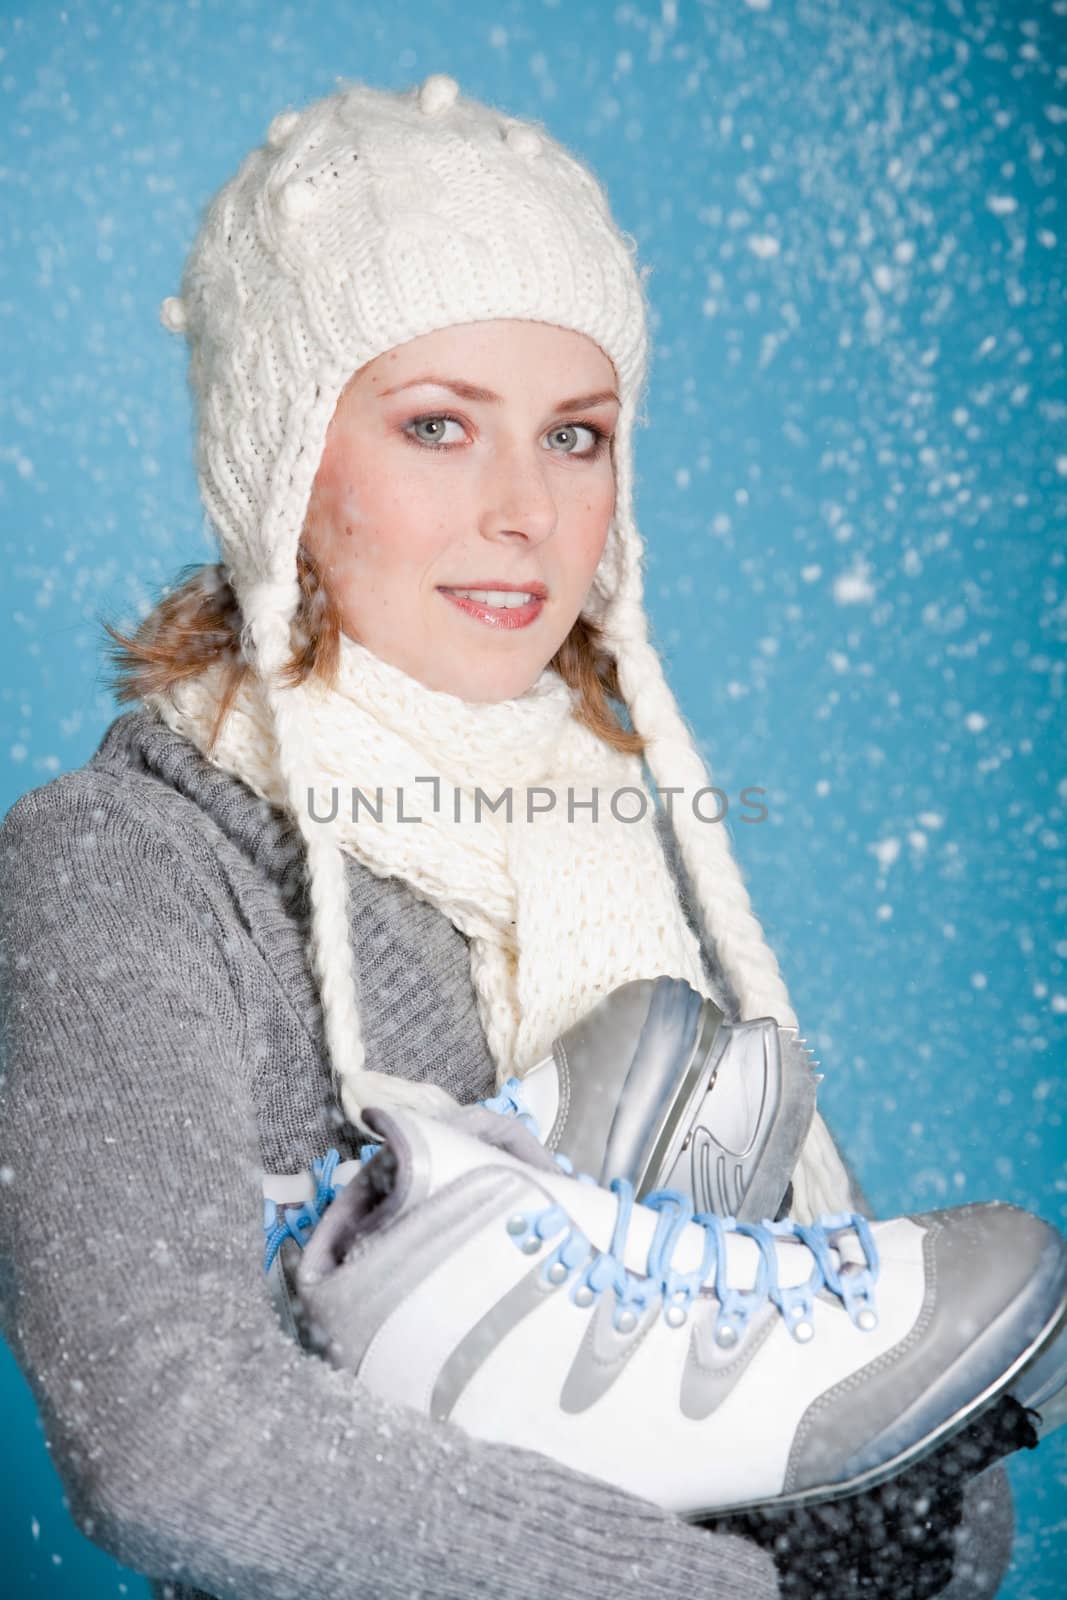 Pretty blond girl warmly dressed with her iceskates under her arm